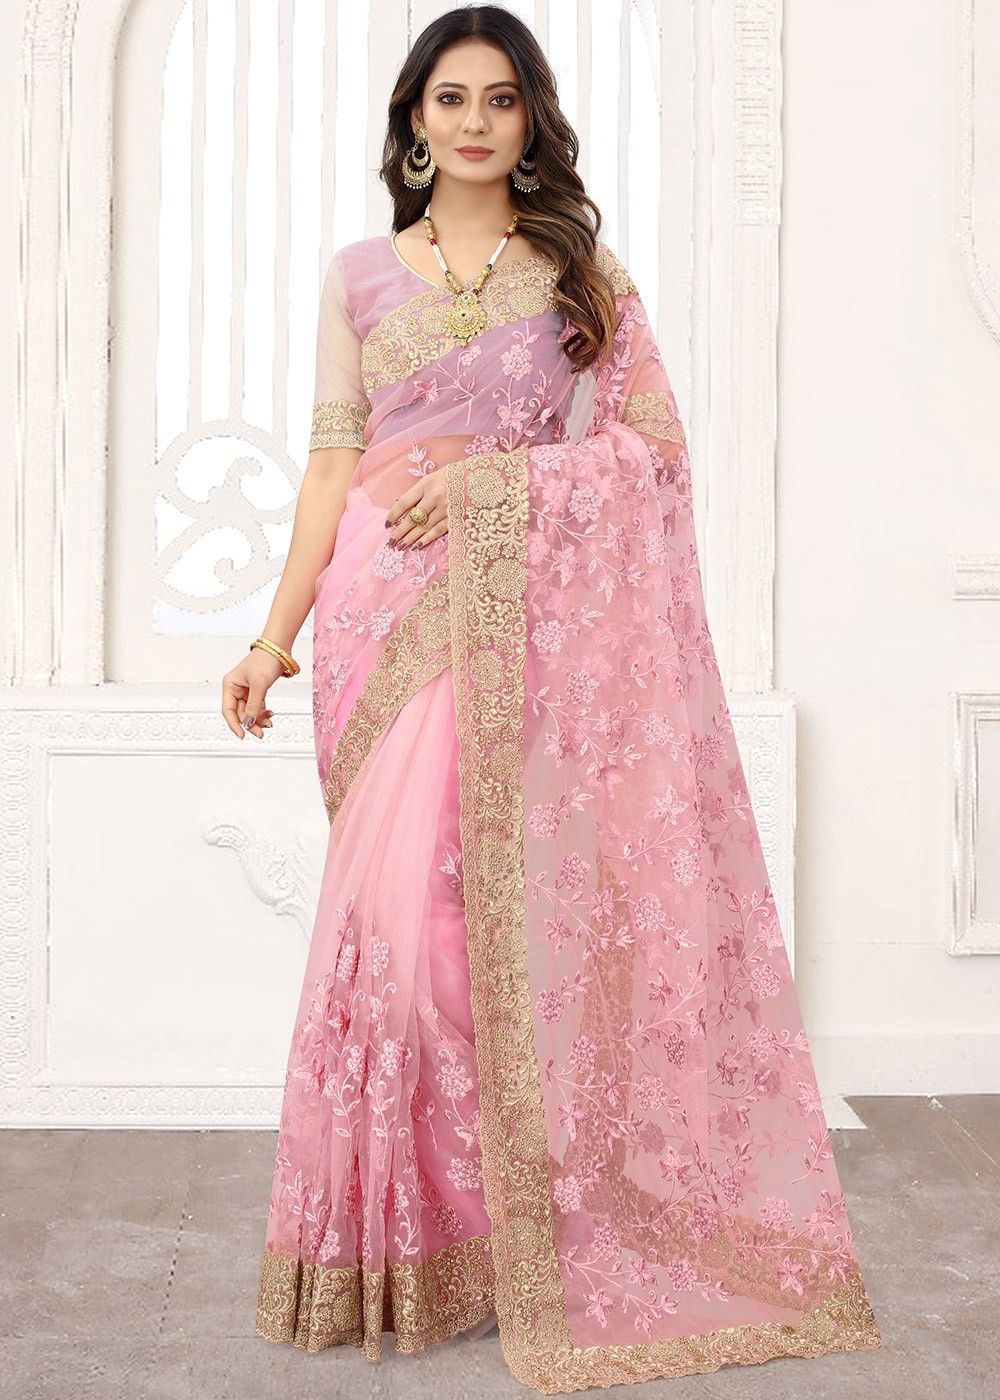 Top Trending Modern Saree Look for Wedding Party 2023 - efashiontribe